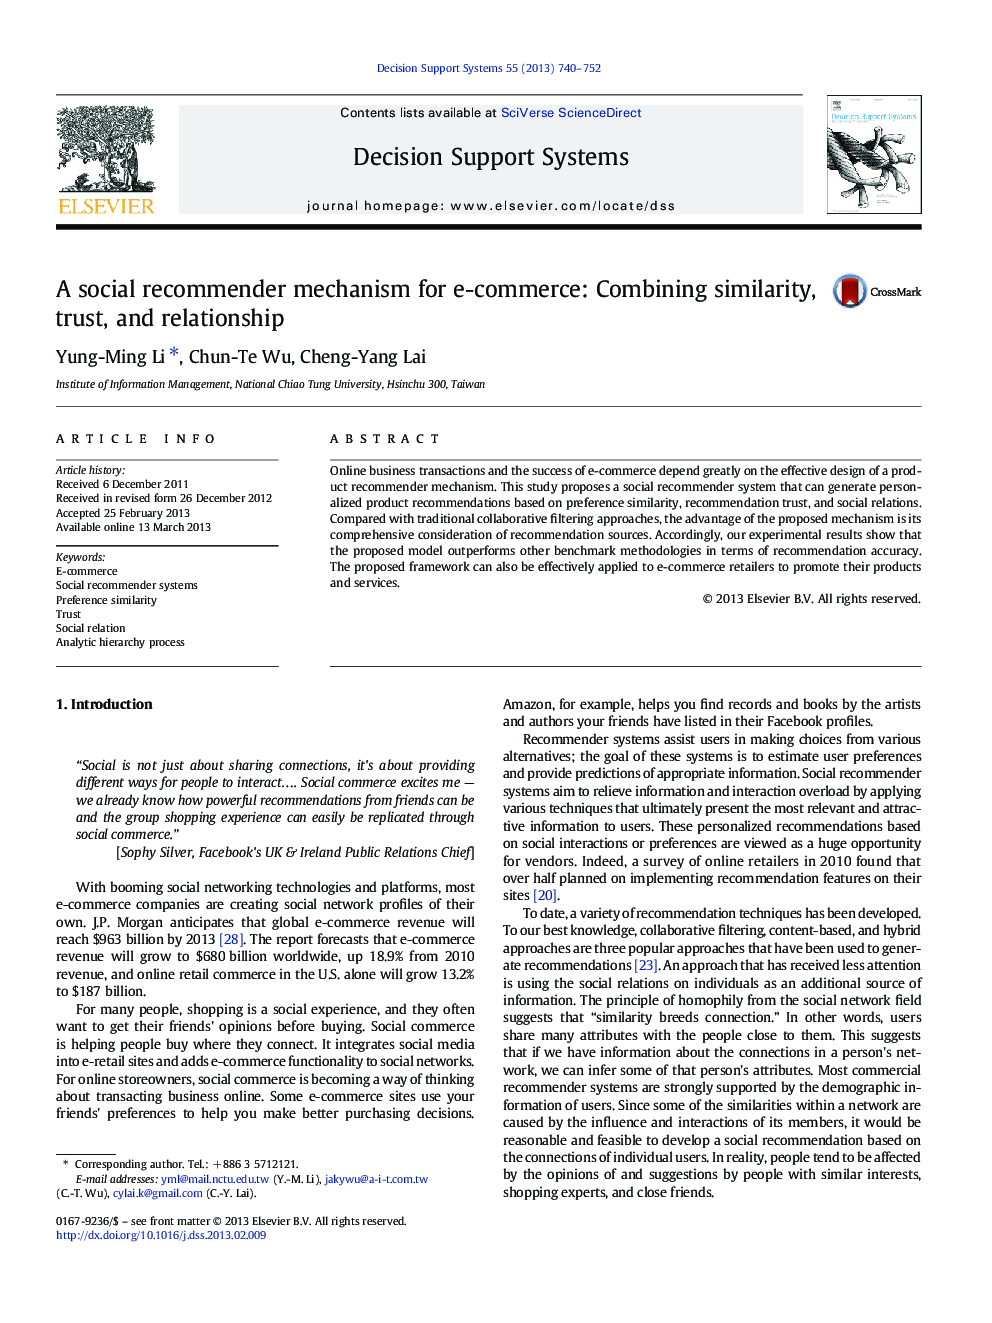 A social recommender mechanism for e-commerce: Combining similarity, trust, and relationship